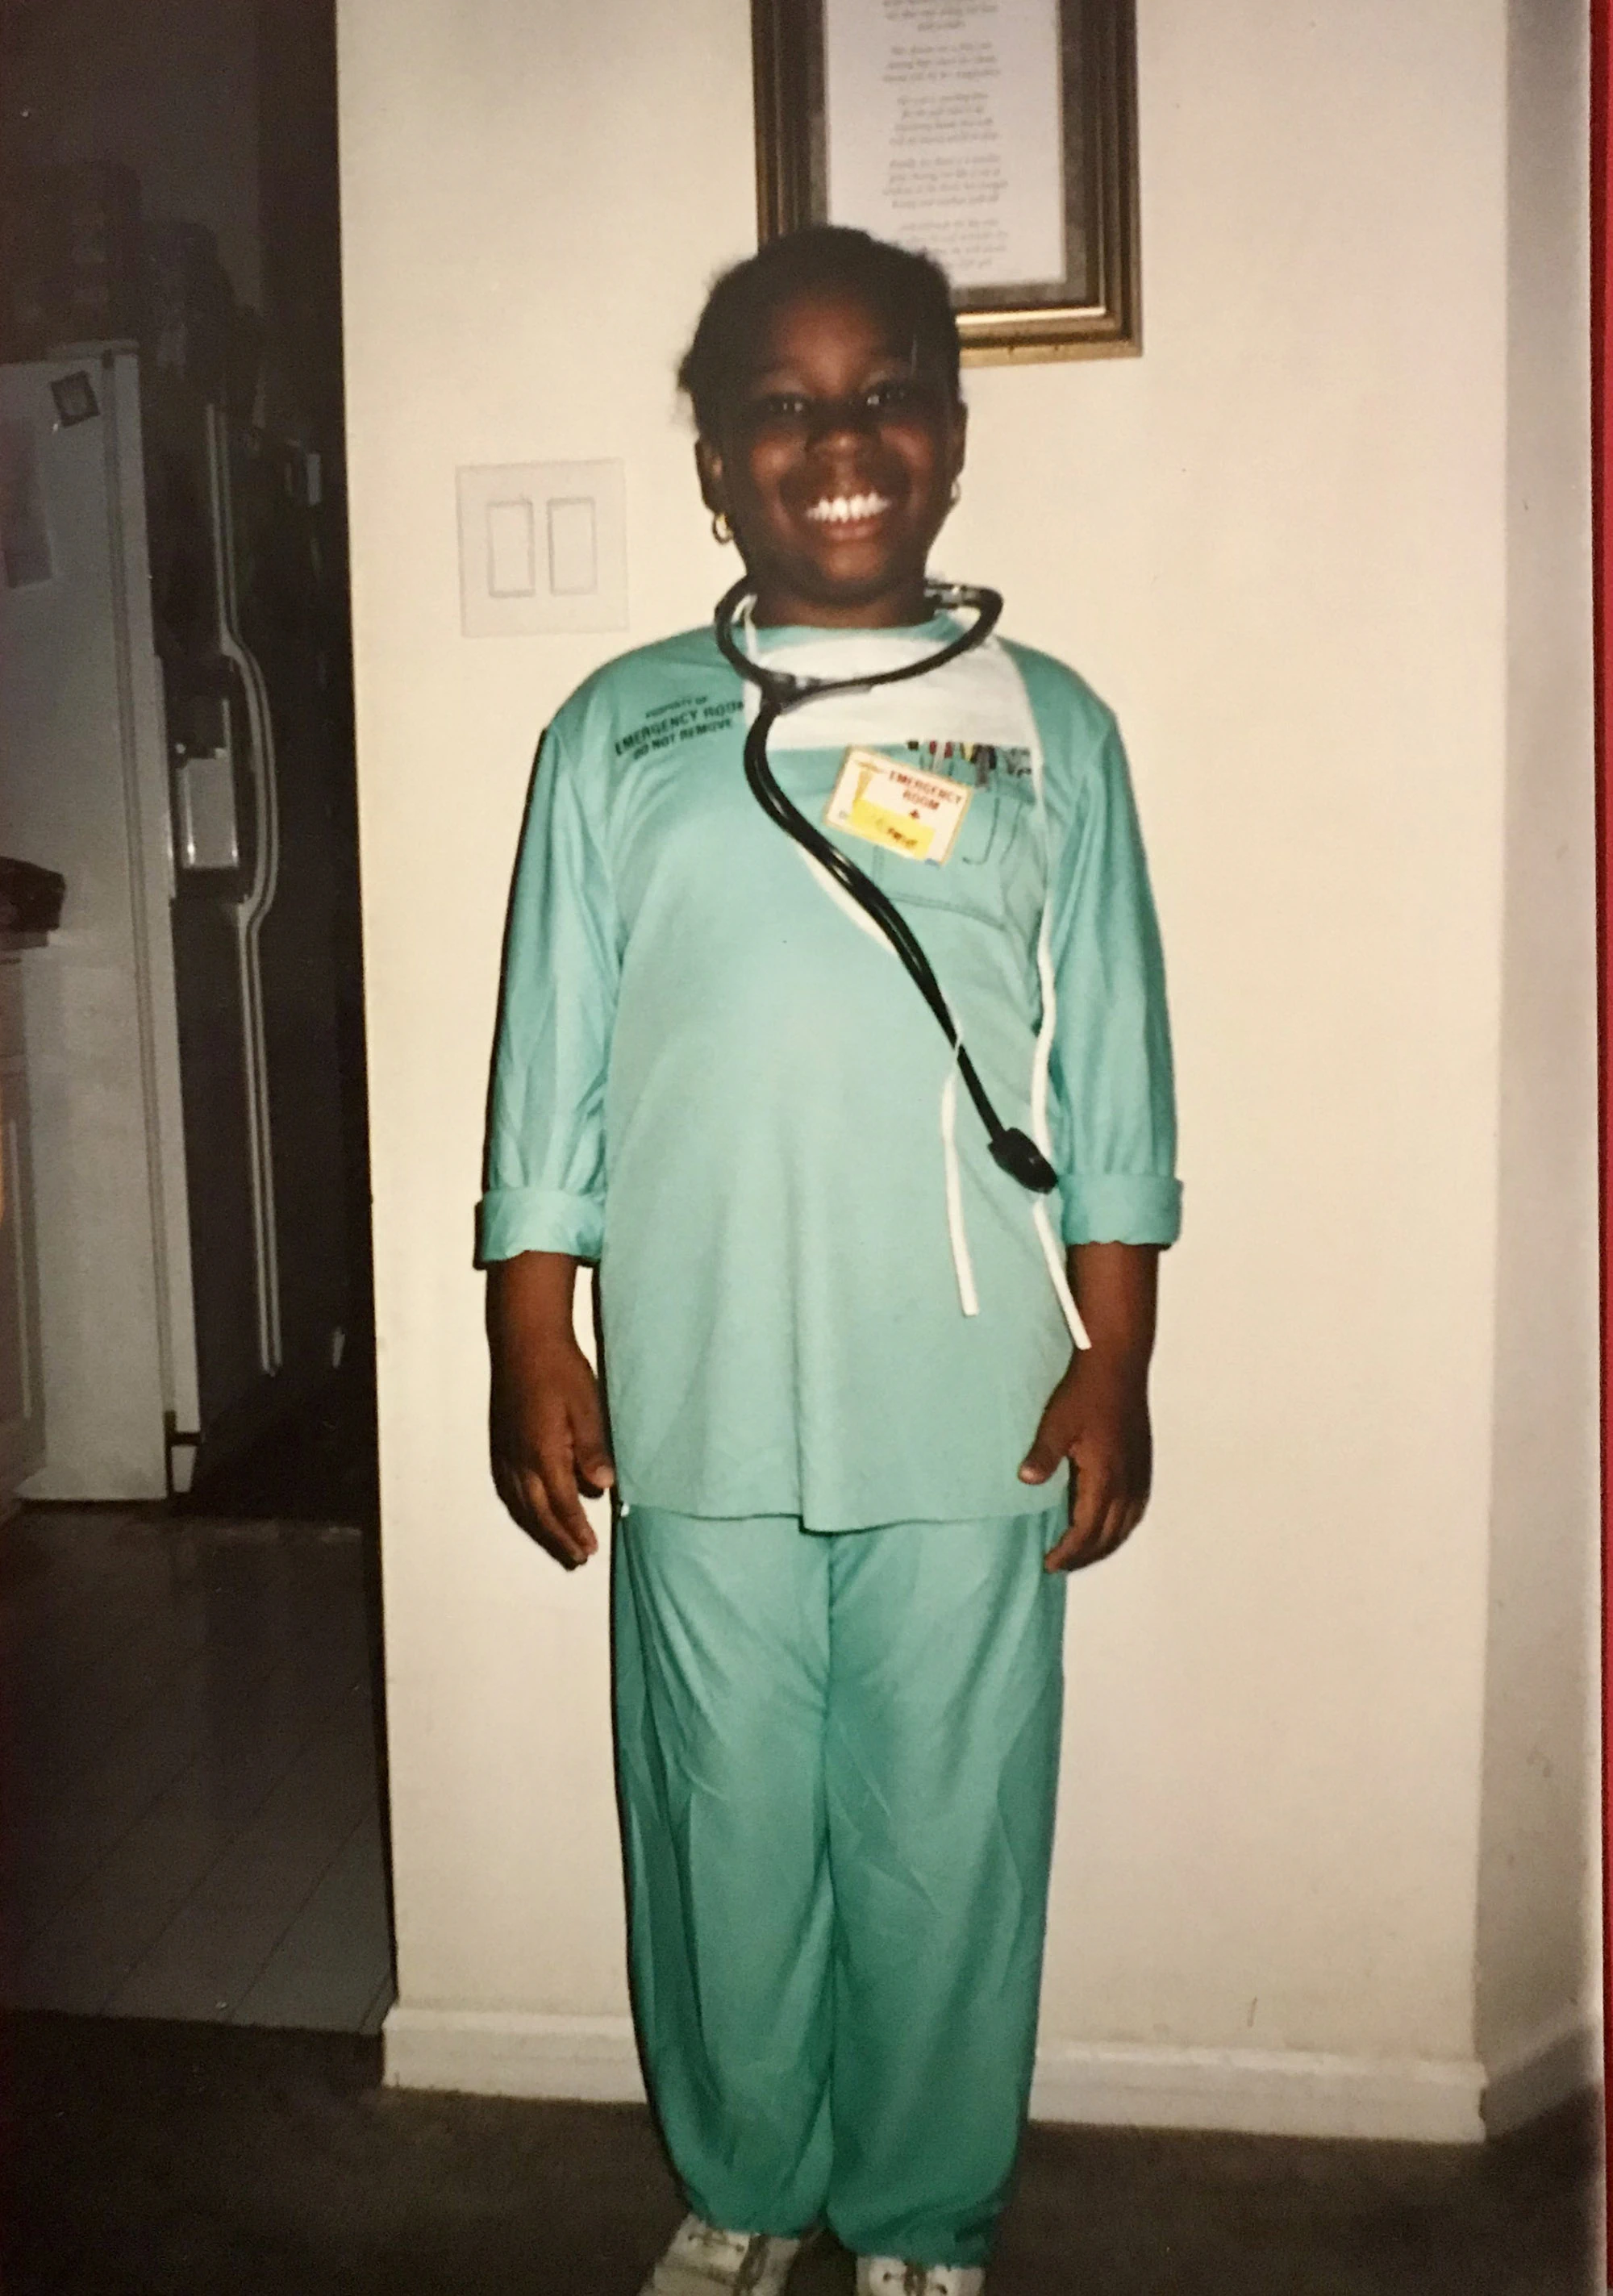 Childhood photo of Uyeh, dressed as a doctor